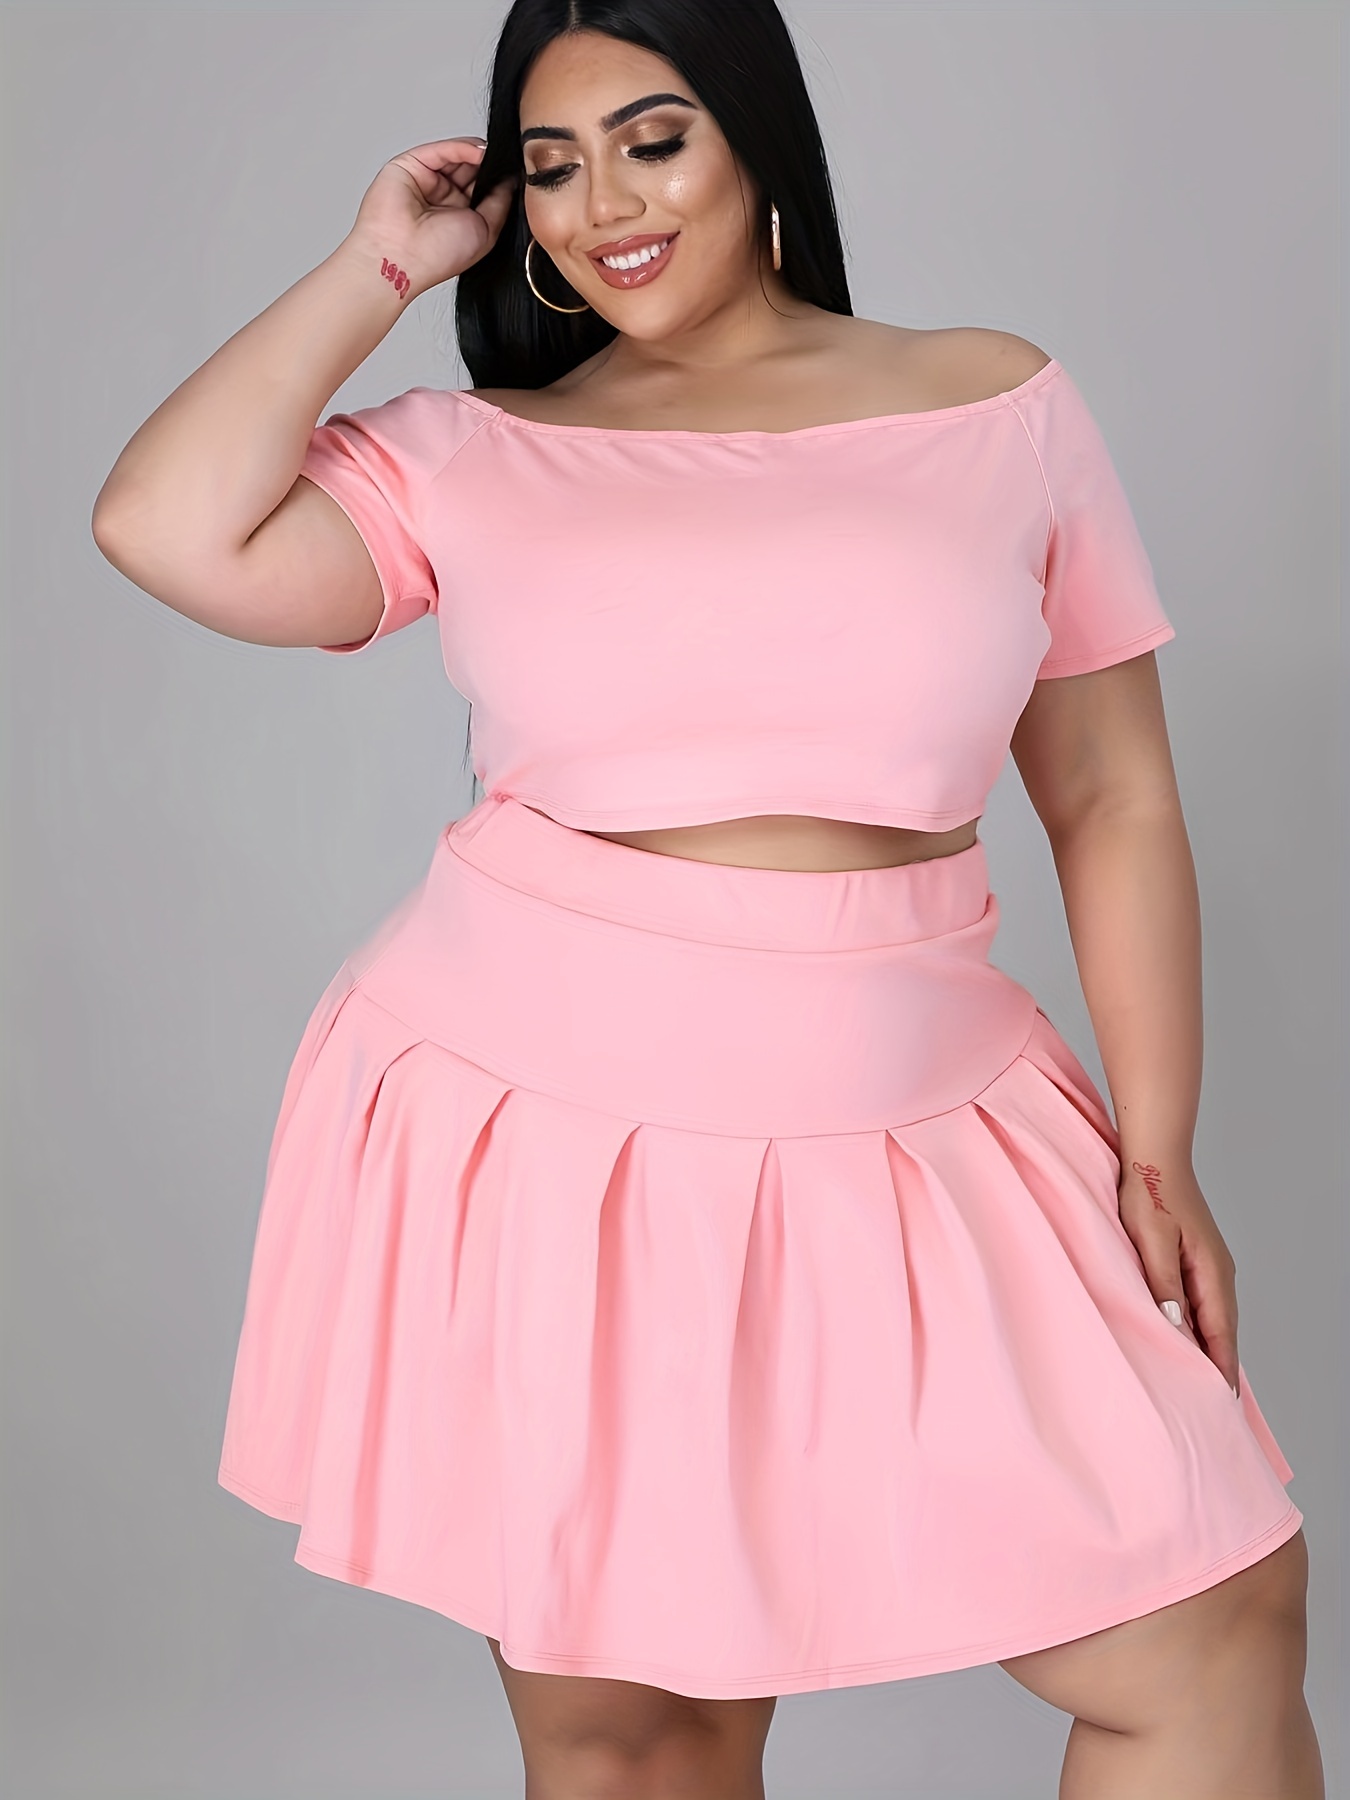 Pink Floral 2-Piece Set - Ruched Mini Skirt - Pink Crop Top